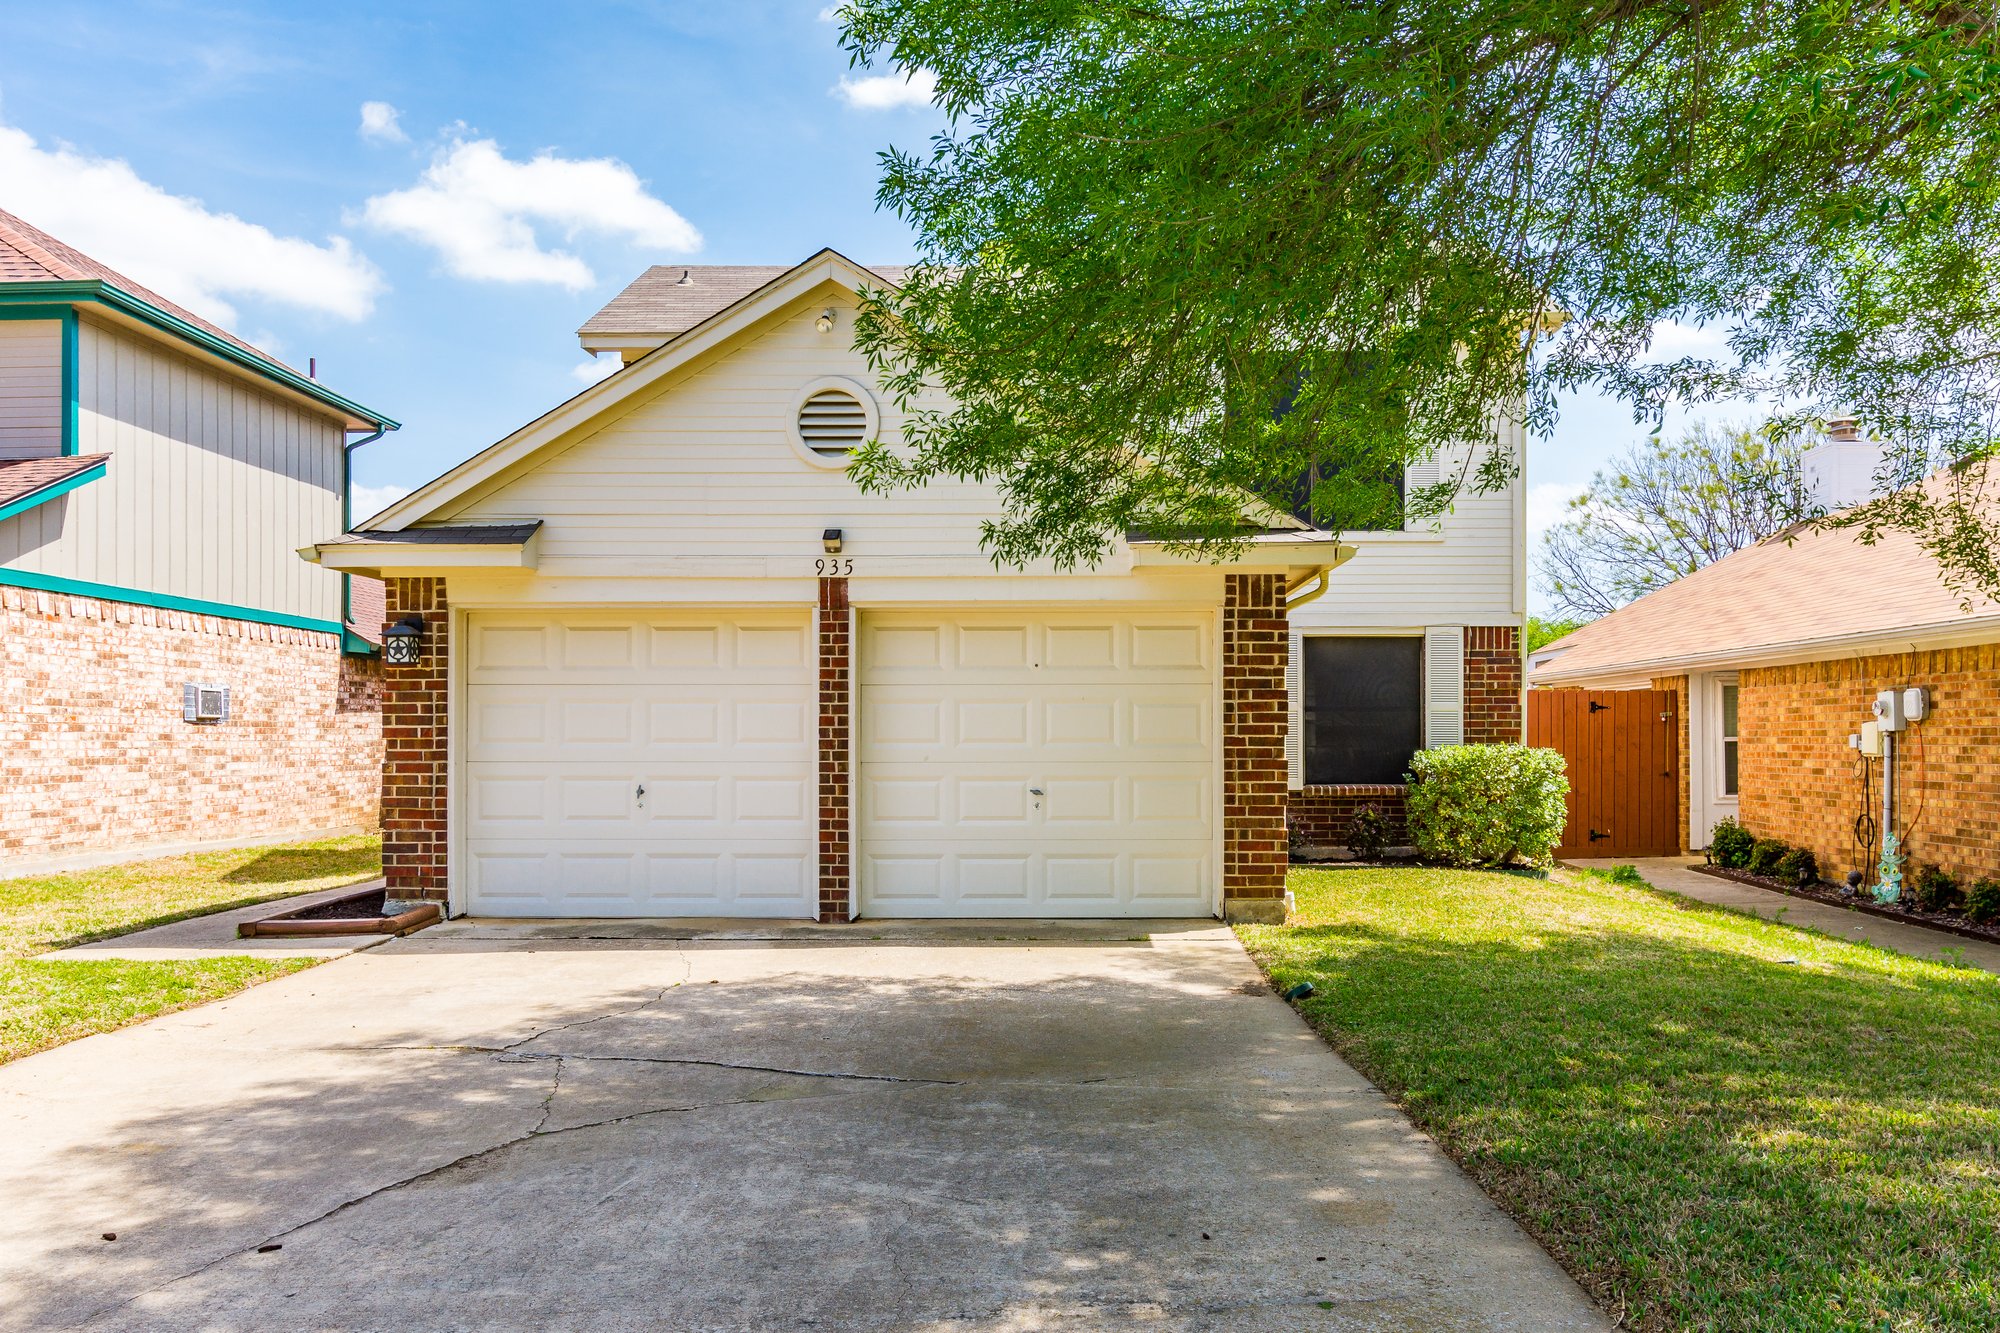 Photo 1 of 26 - 935 Boxwood Dr, Lewisville, TX 75067